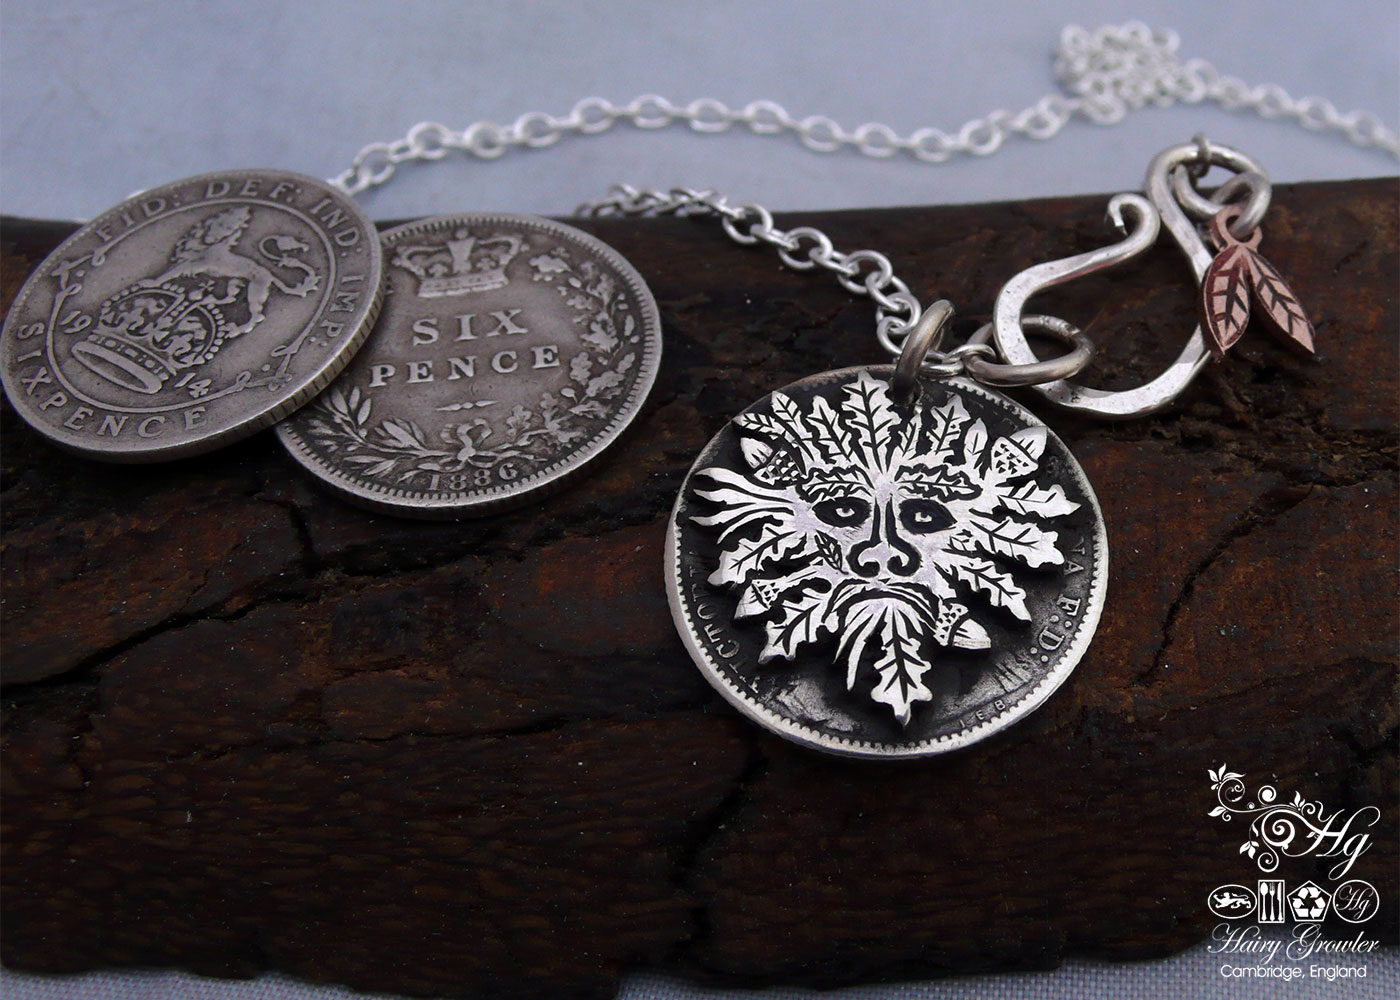 Handcrafted and recycled silver sixpence coin greenman pendant necklace